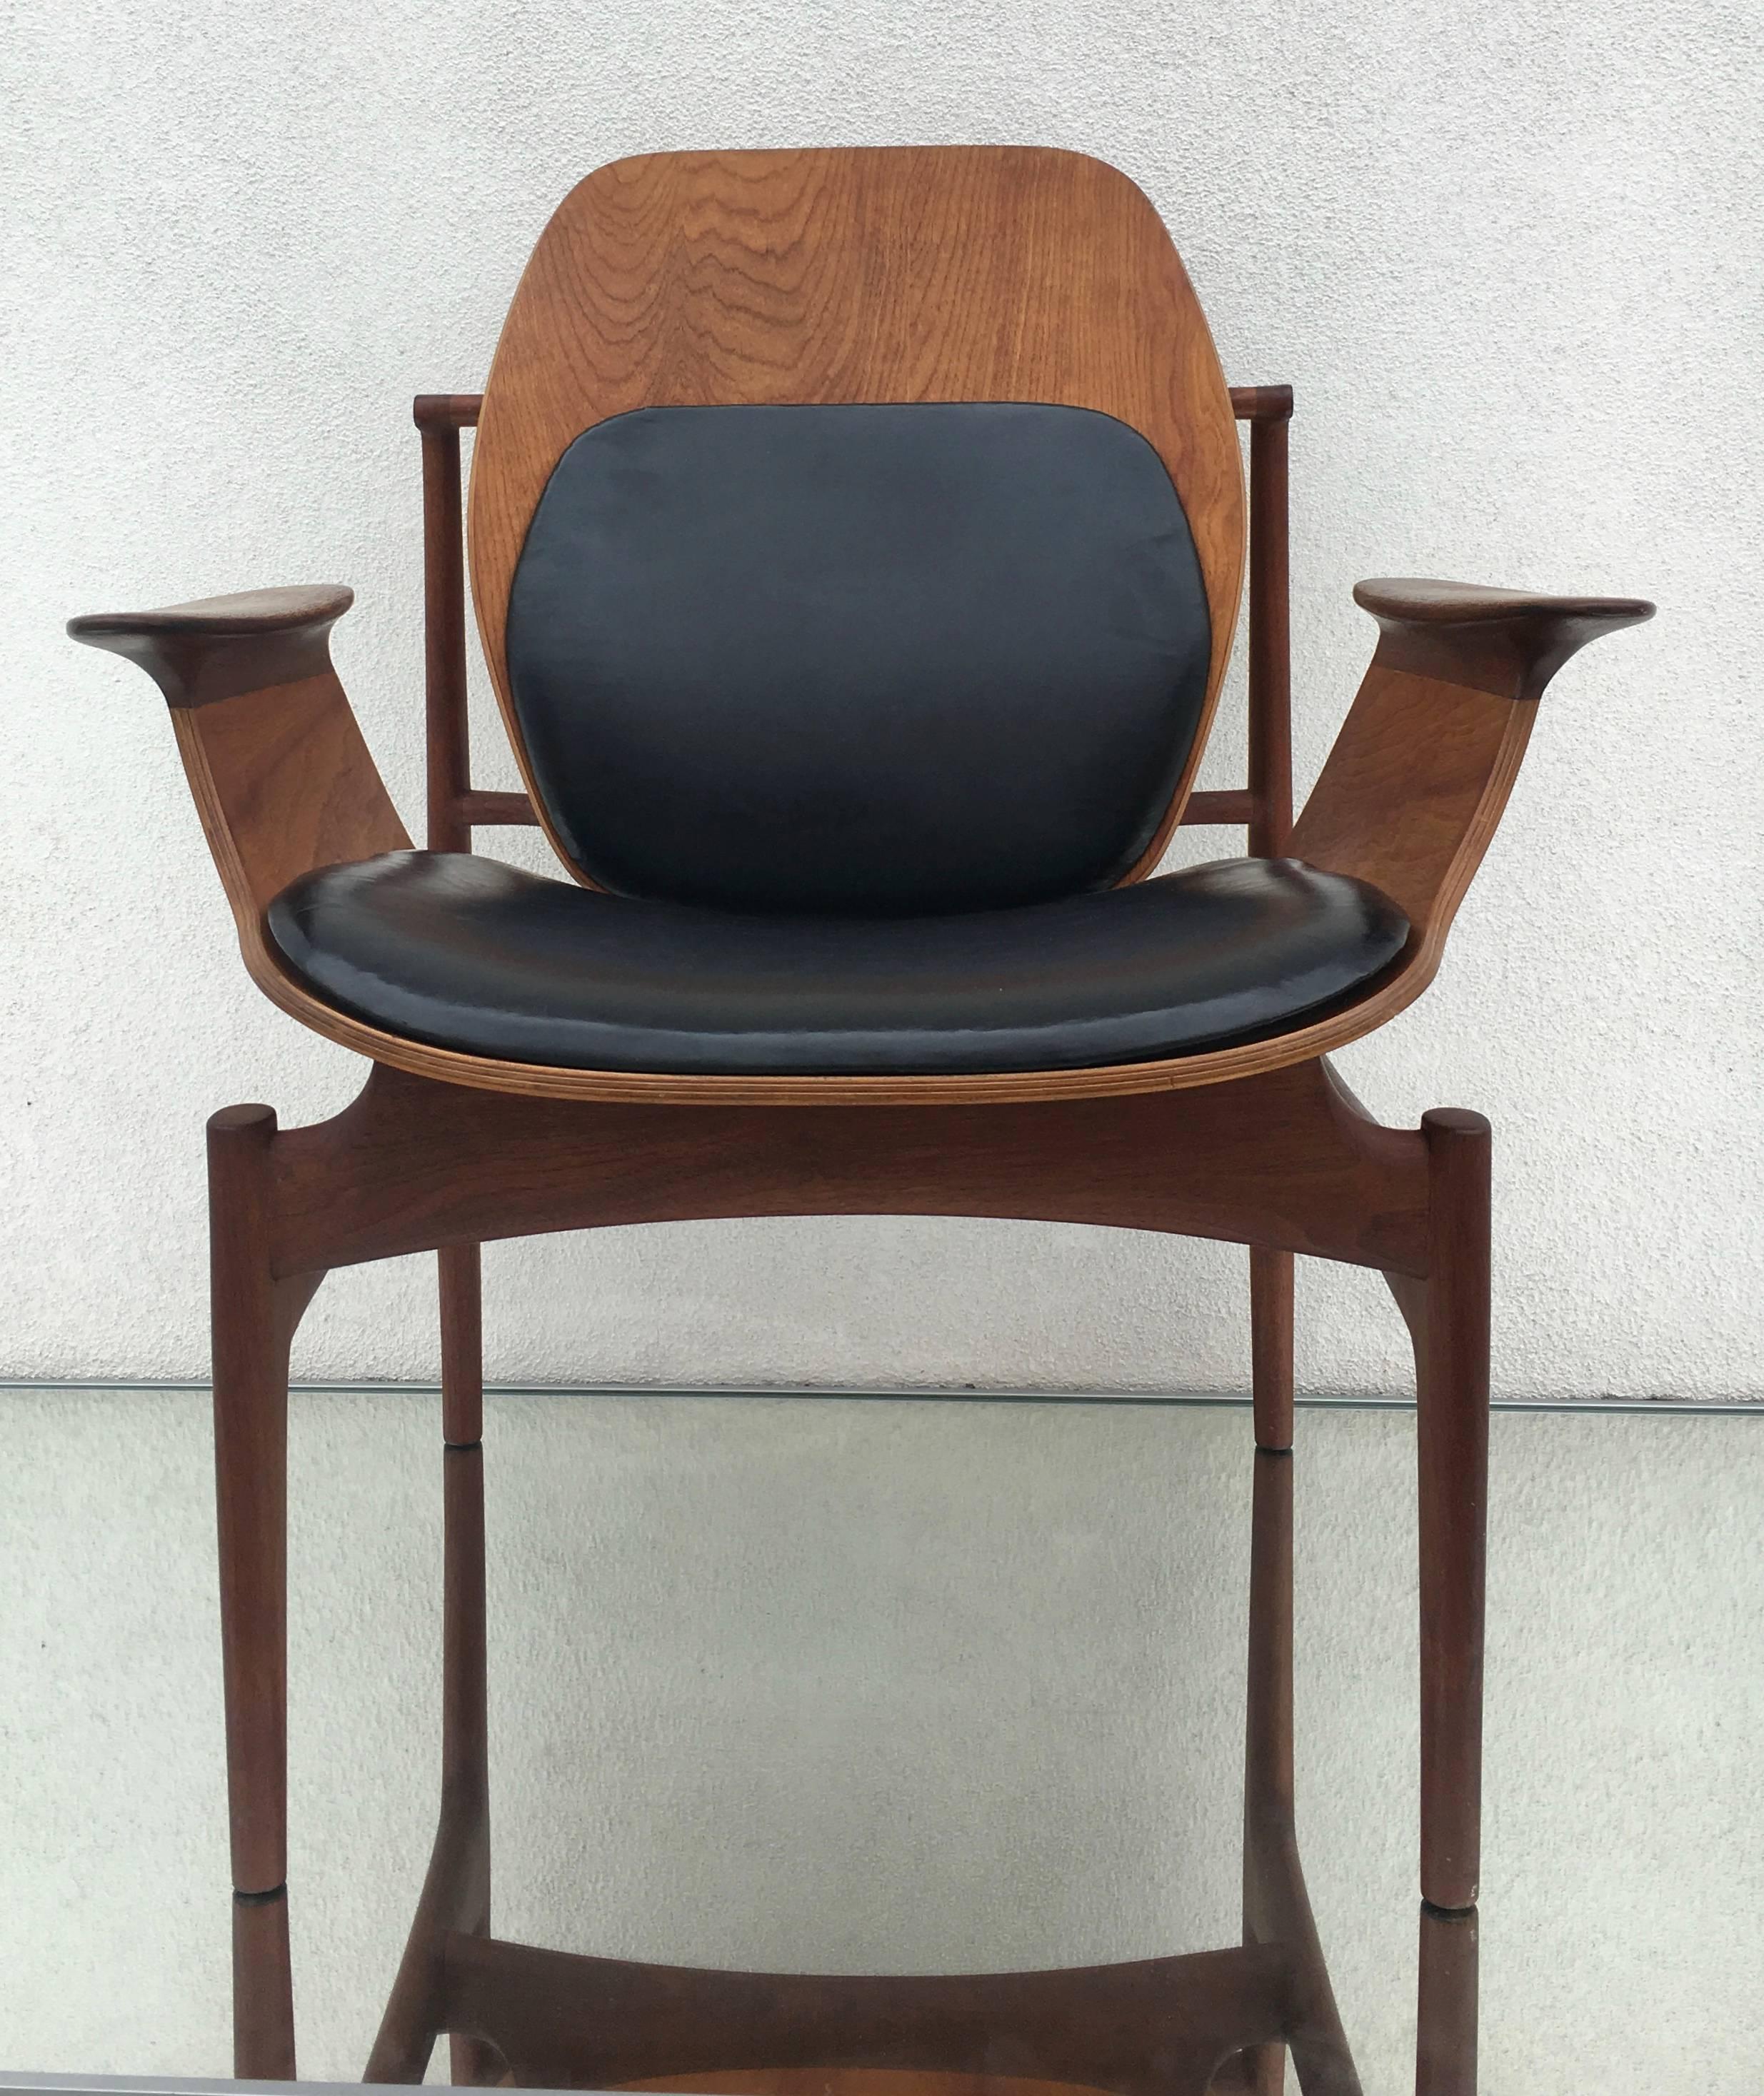 Stunning One off 1/1 Studio Chair by John McWilliams, California, circa 1960s In Good Condition For Sale In San Diego, CA